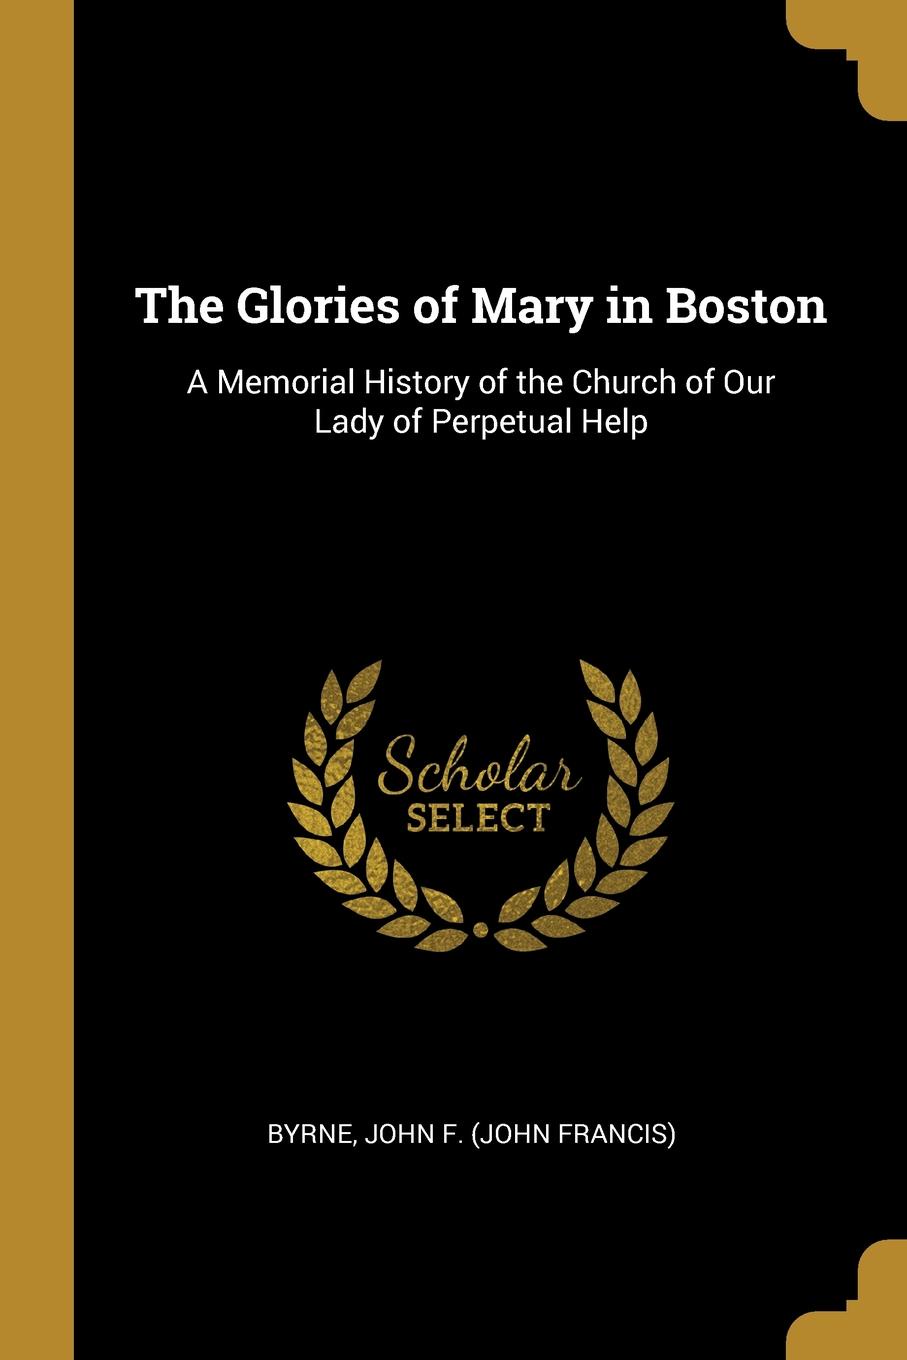 The Glories of Mary in Boston. A Memorial History of the Church of Our Lady of Perpetual Help